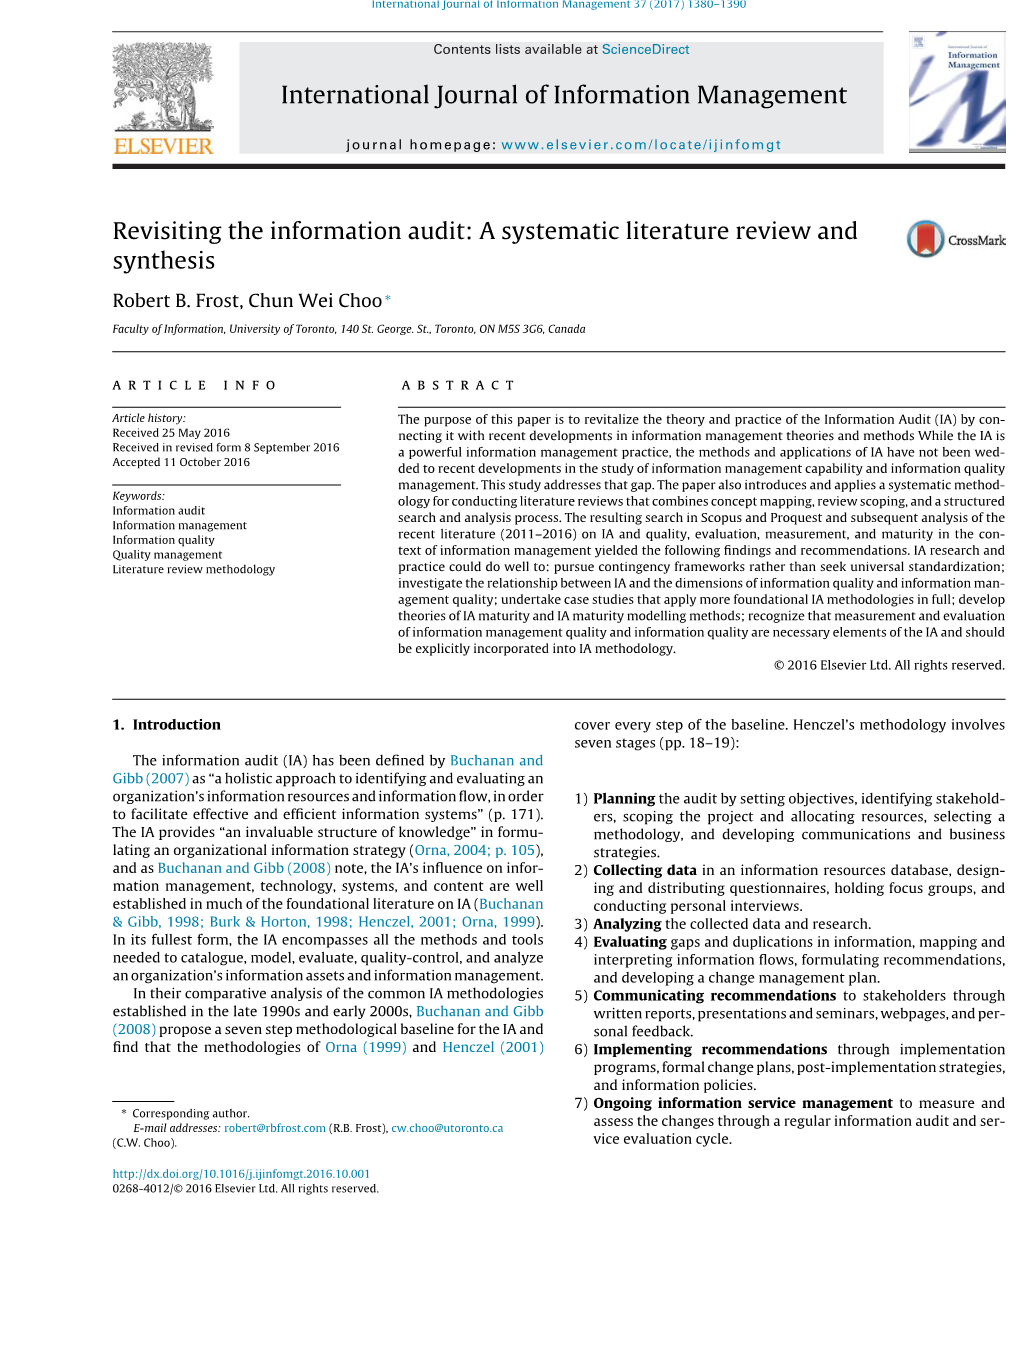 A Systematic Literature Review and Synthesis